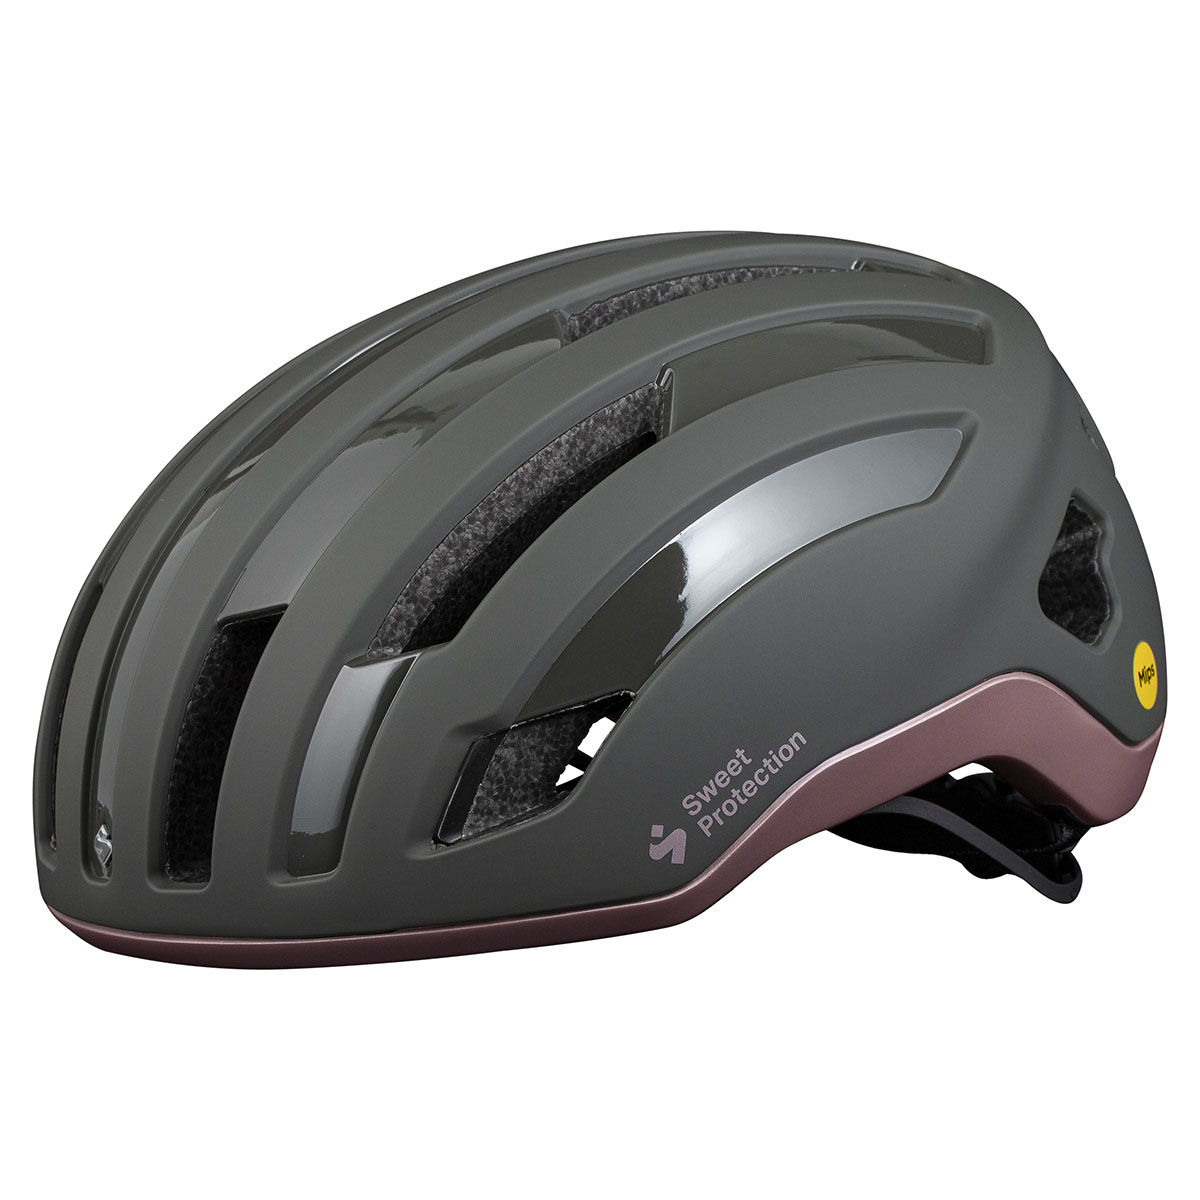 CASQUE SWEET PROTECTION OUTRIDER MIPS GRIS/ROSE MEDIUM